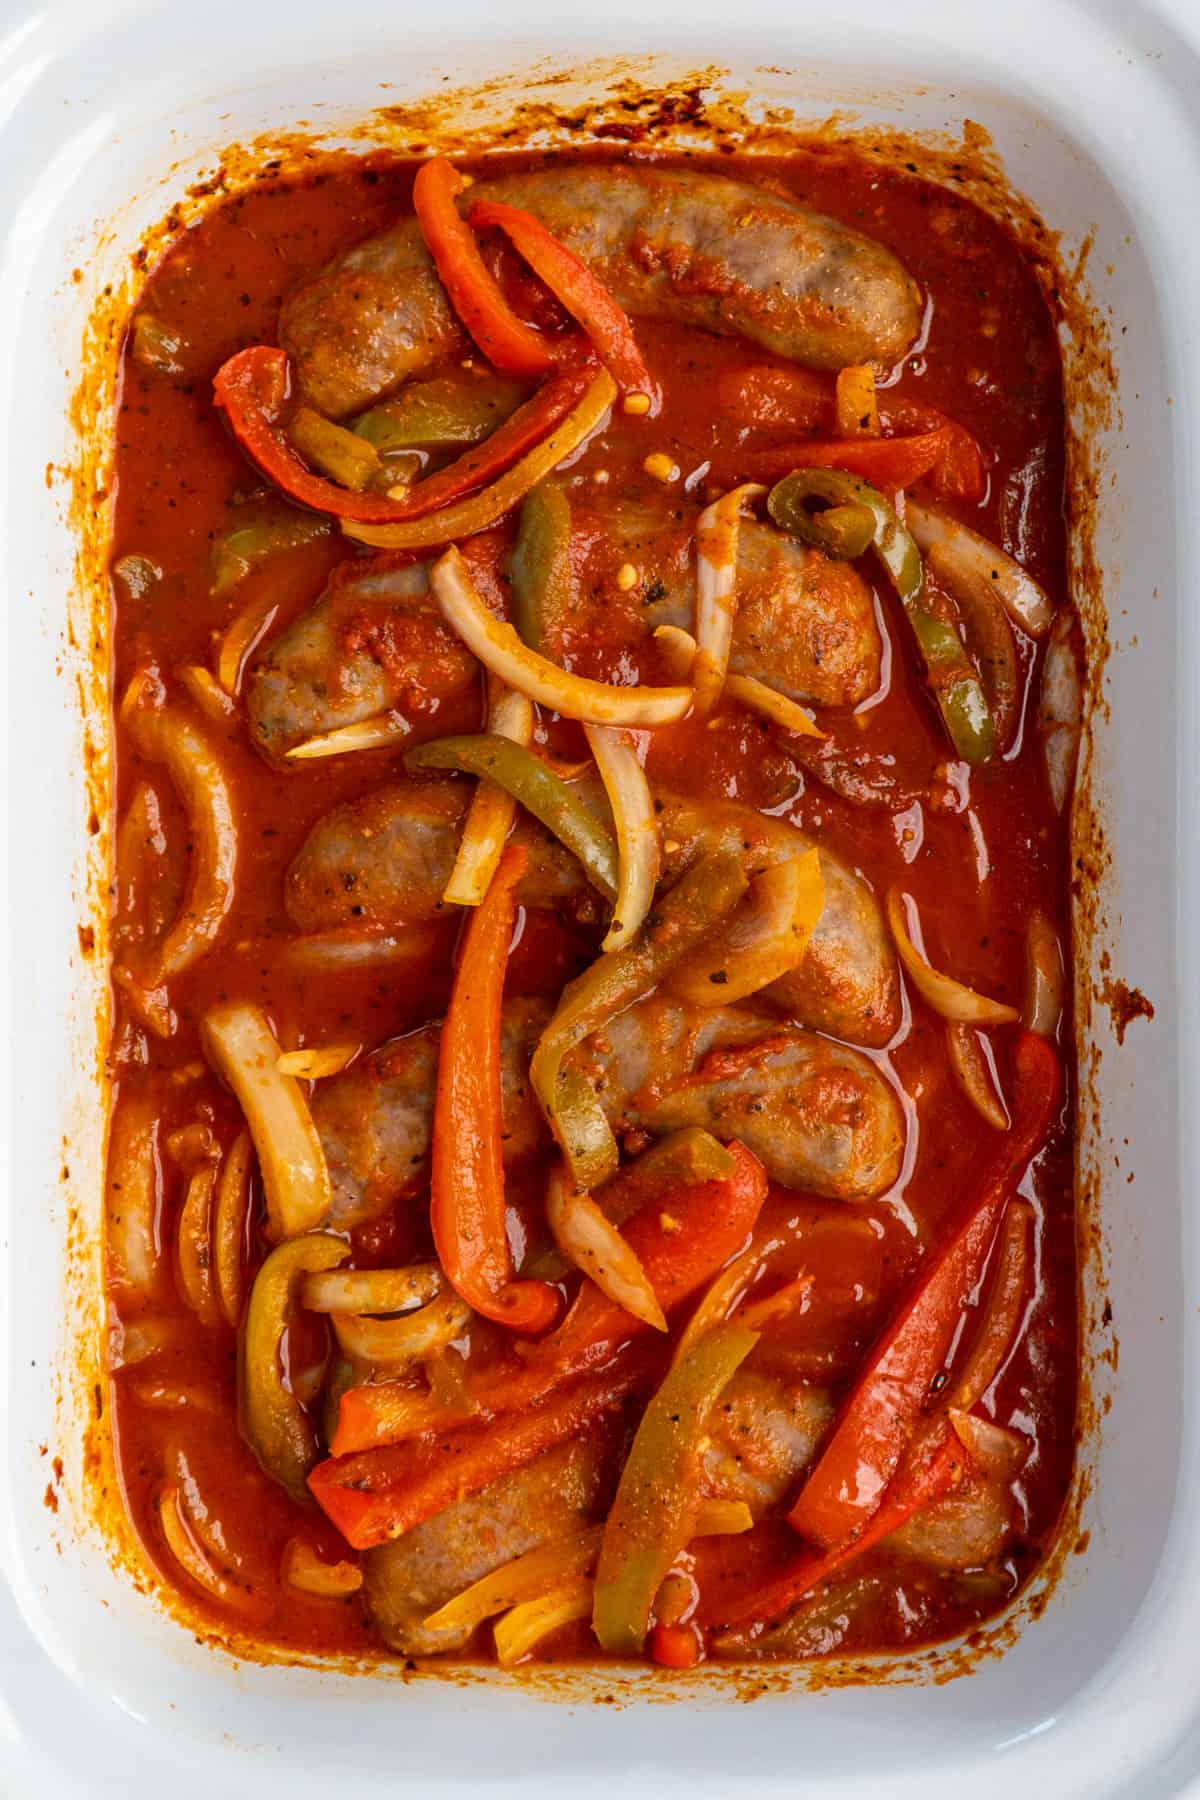 Overhead look at sausage and peppers inside a white slow cooker.